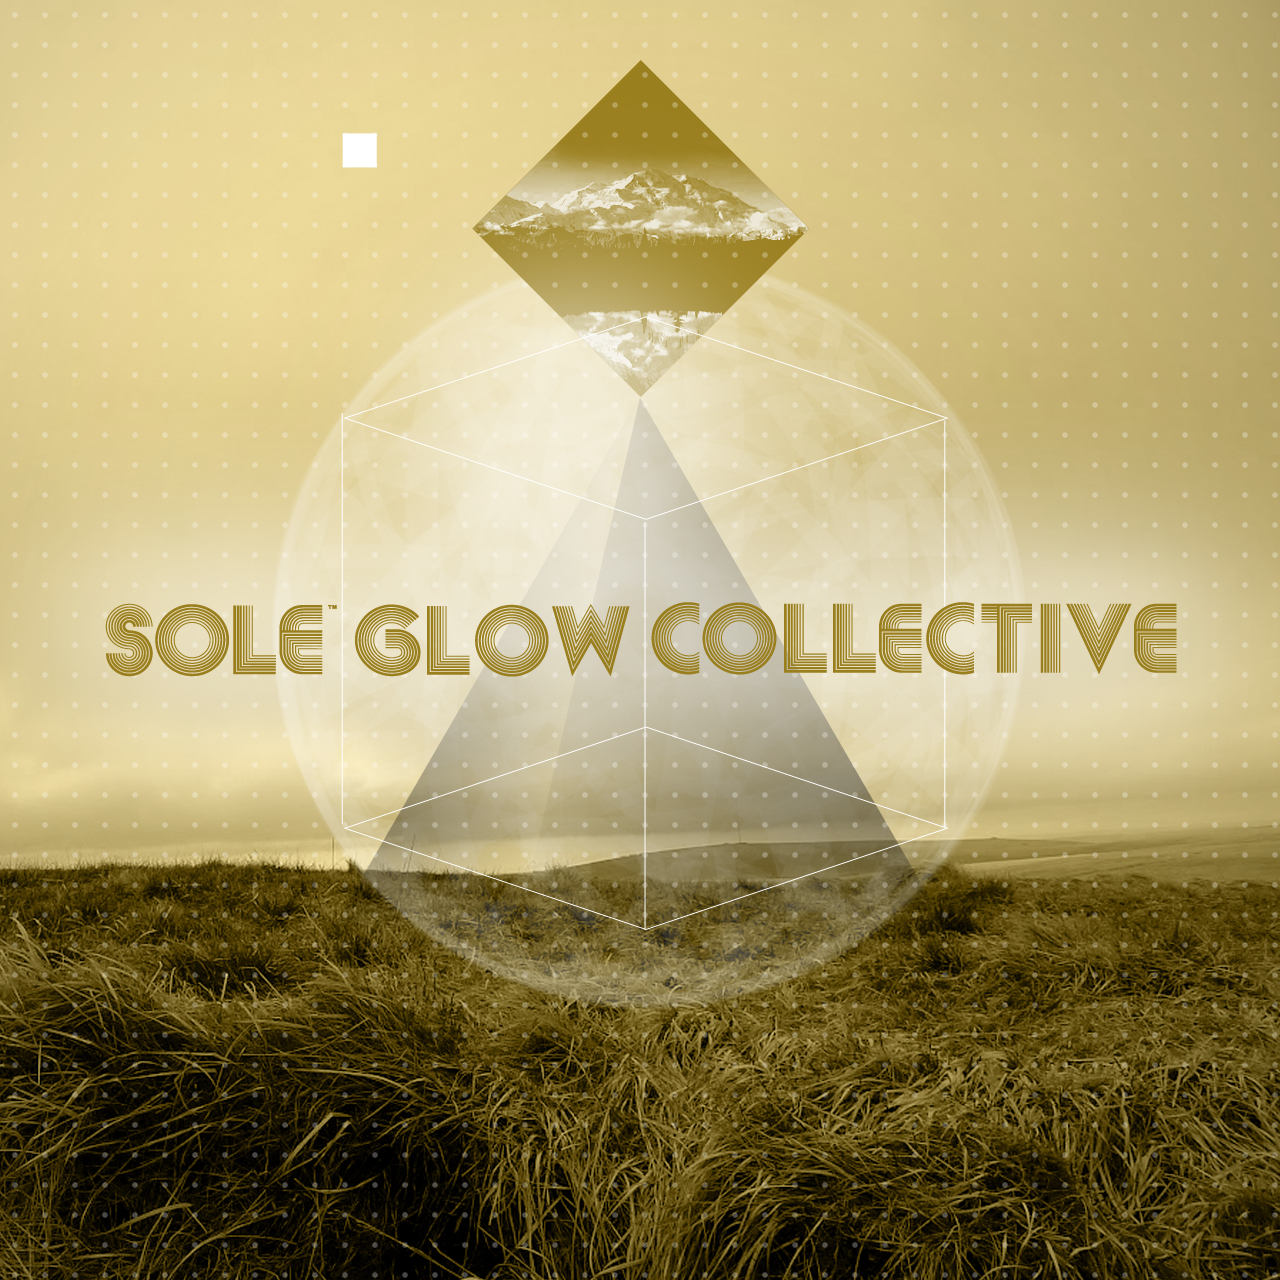 Free Download: Sole Glow Collective – Compilation Vol. 1 (2012)